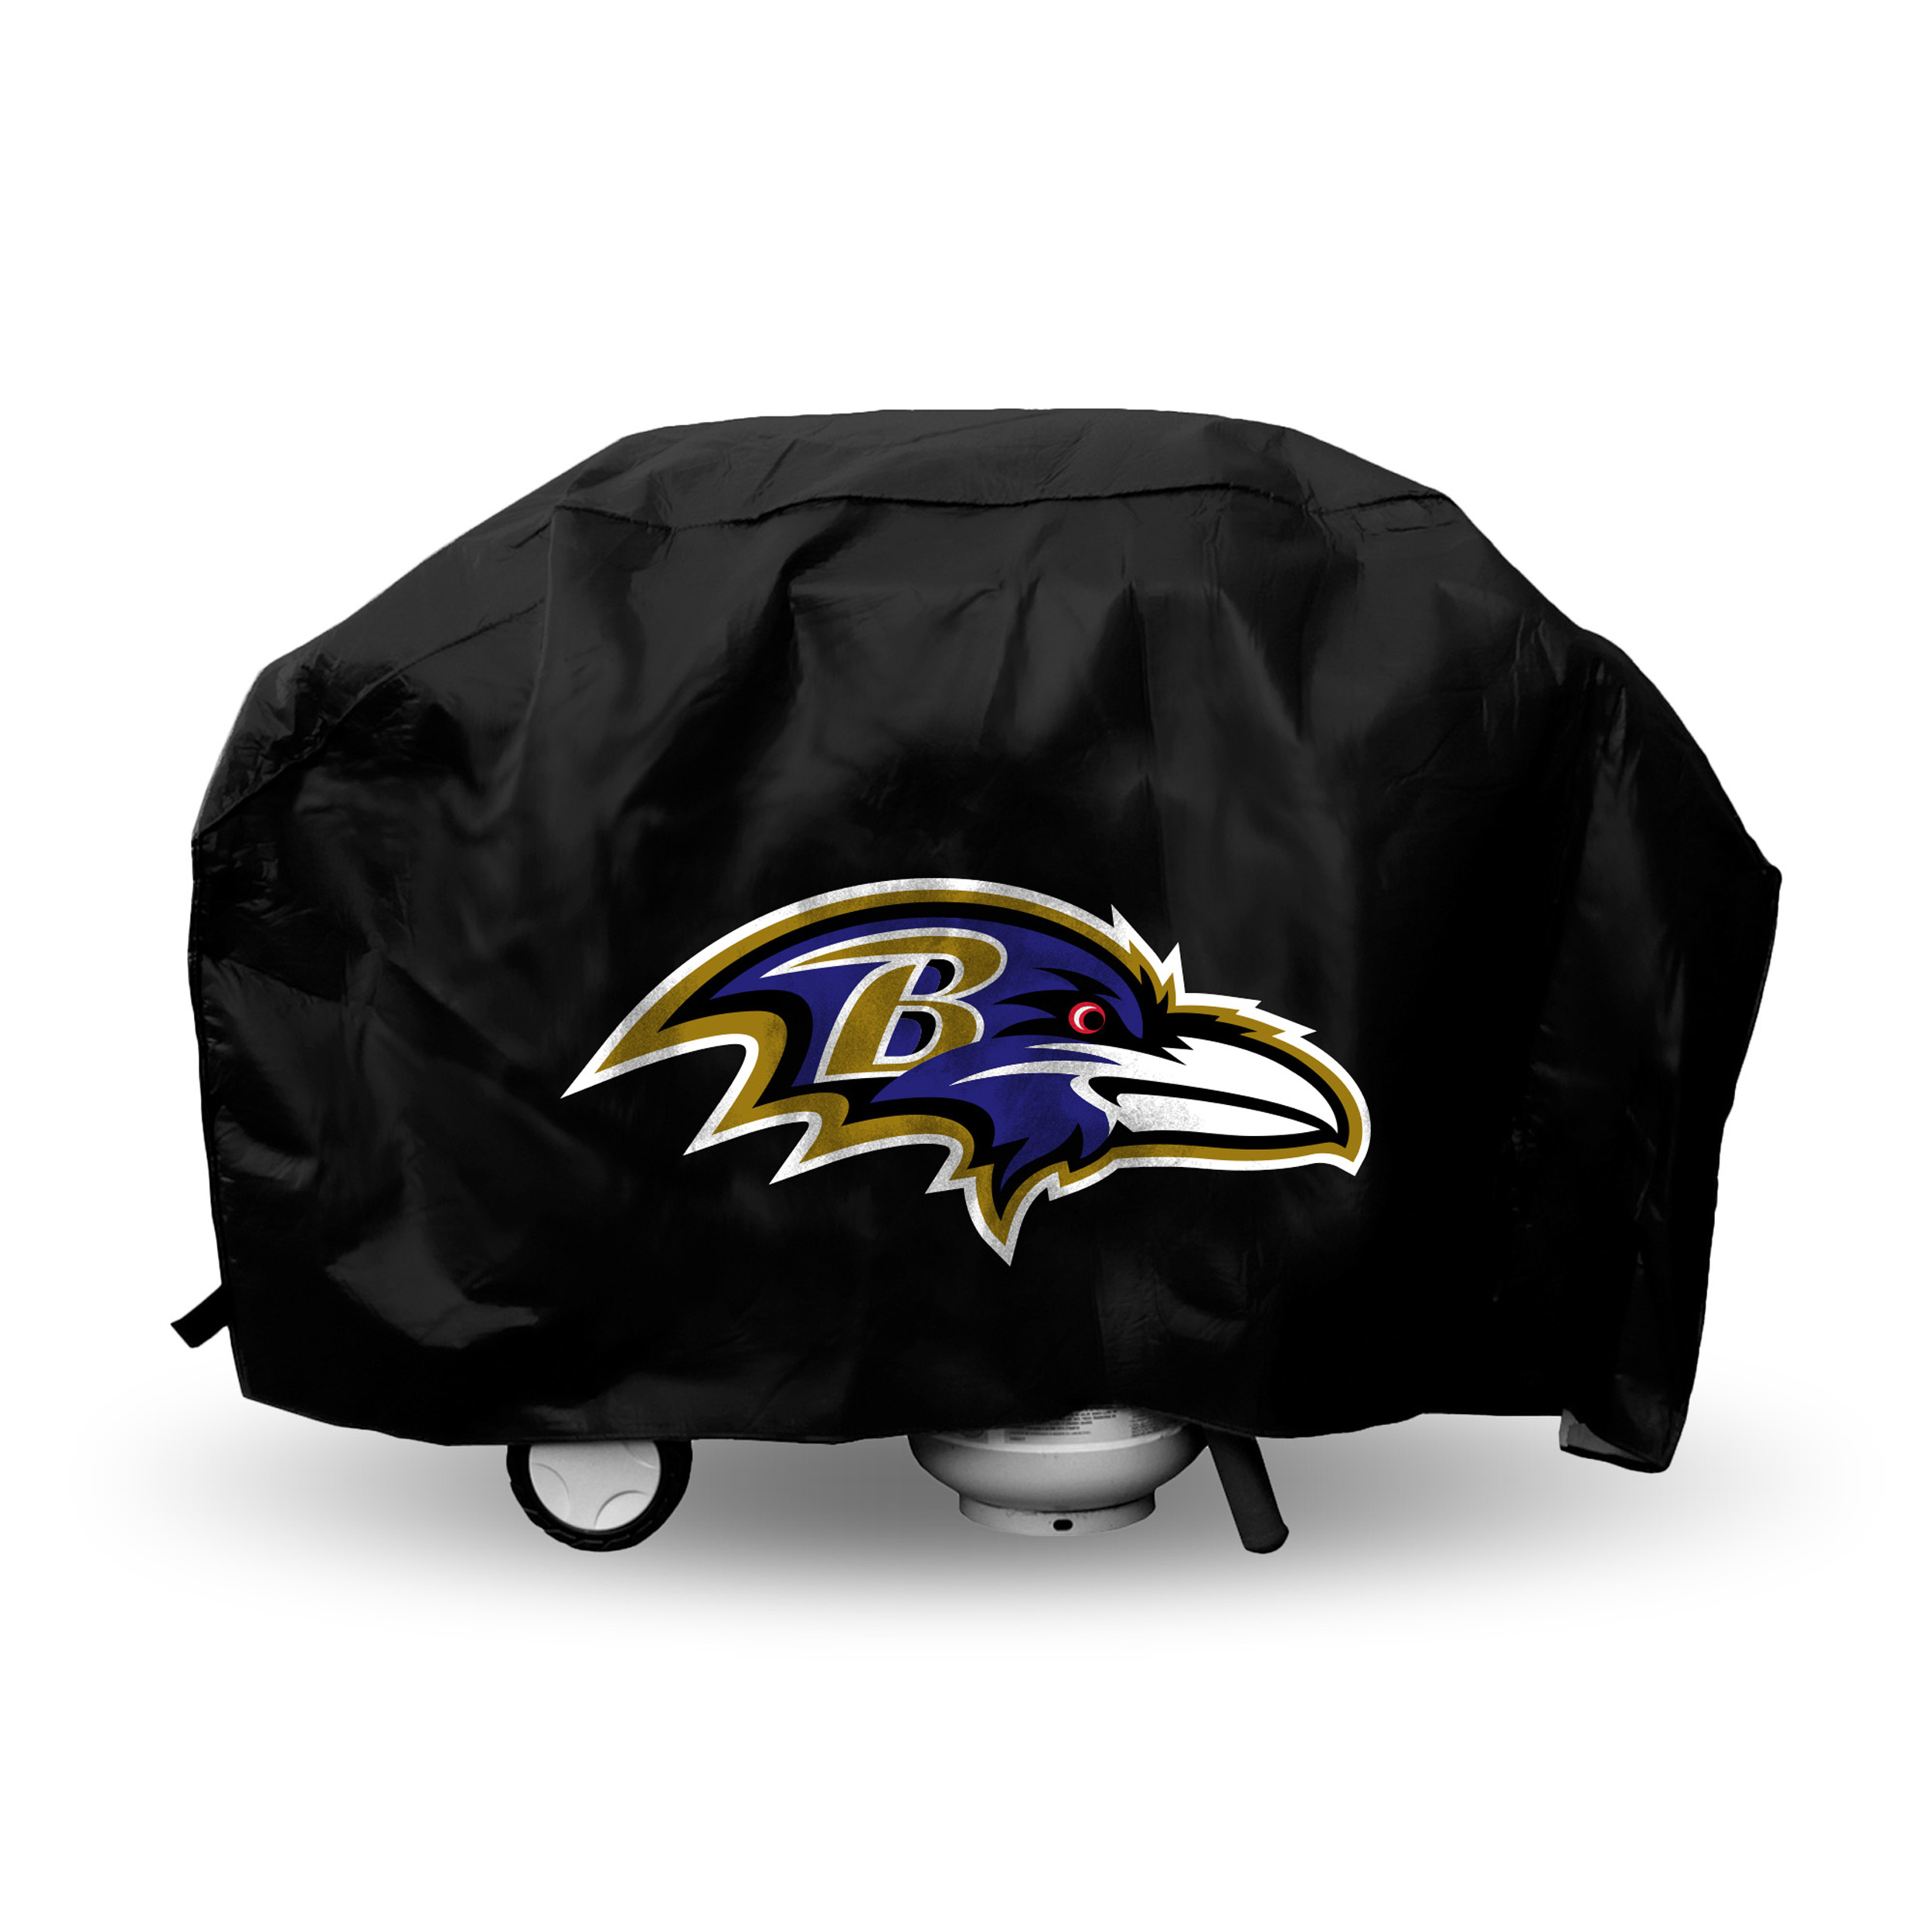 Rico Industries NFL - Economy Grill Cover, Baltimore Ravens - image 1 of 7